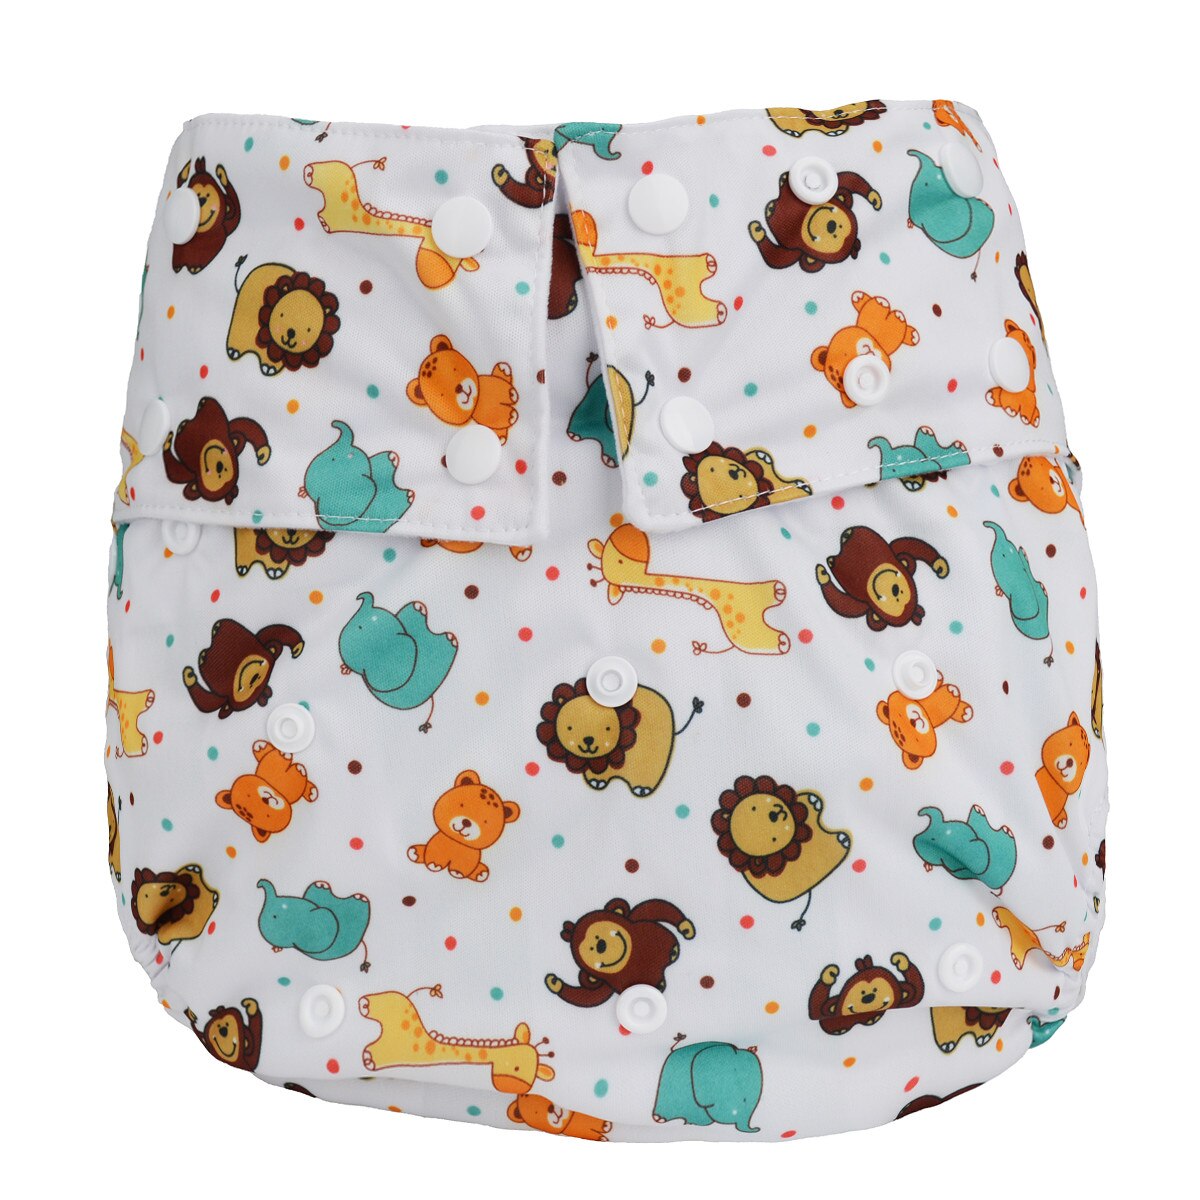 Reusable Adult Cloth Diaper/Nappy Pocket - Cloth Diapers - Twisted Jezebel